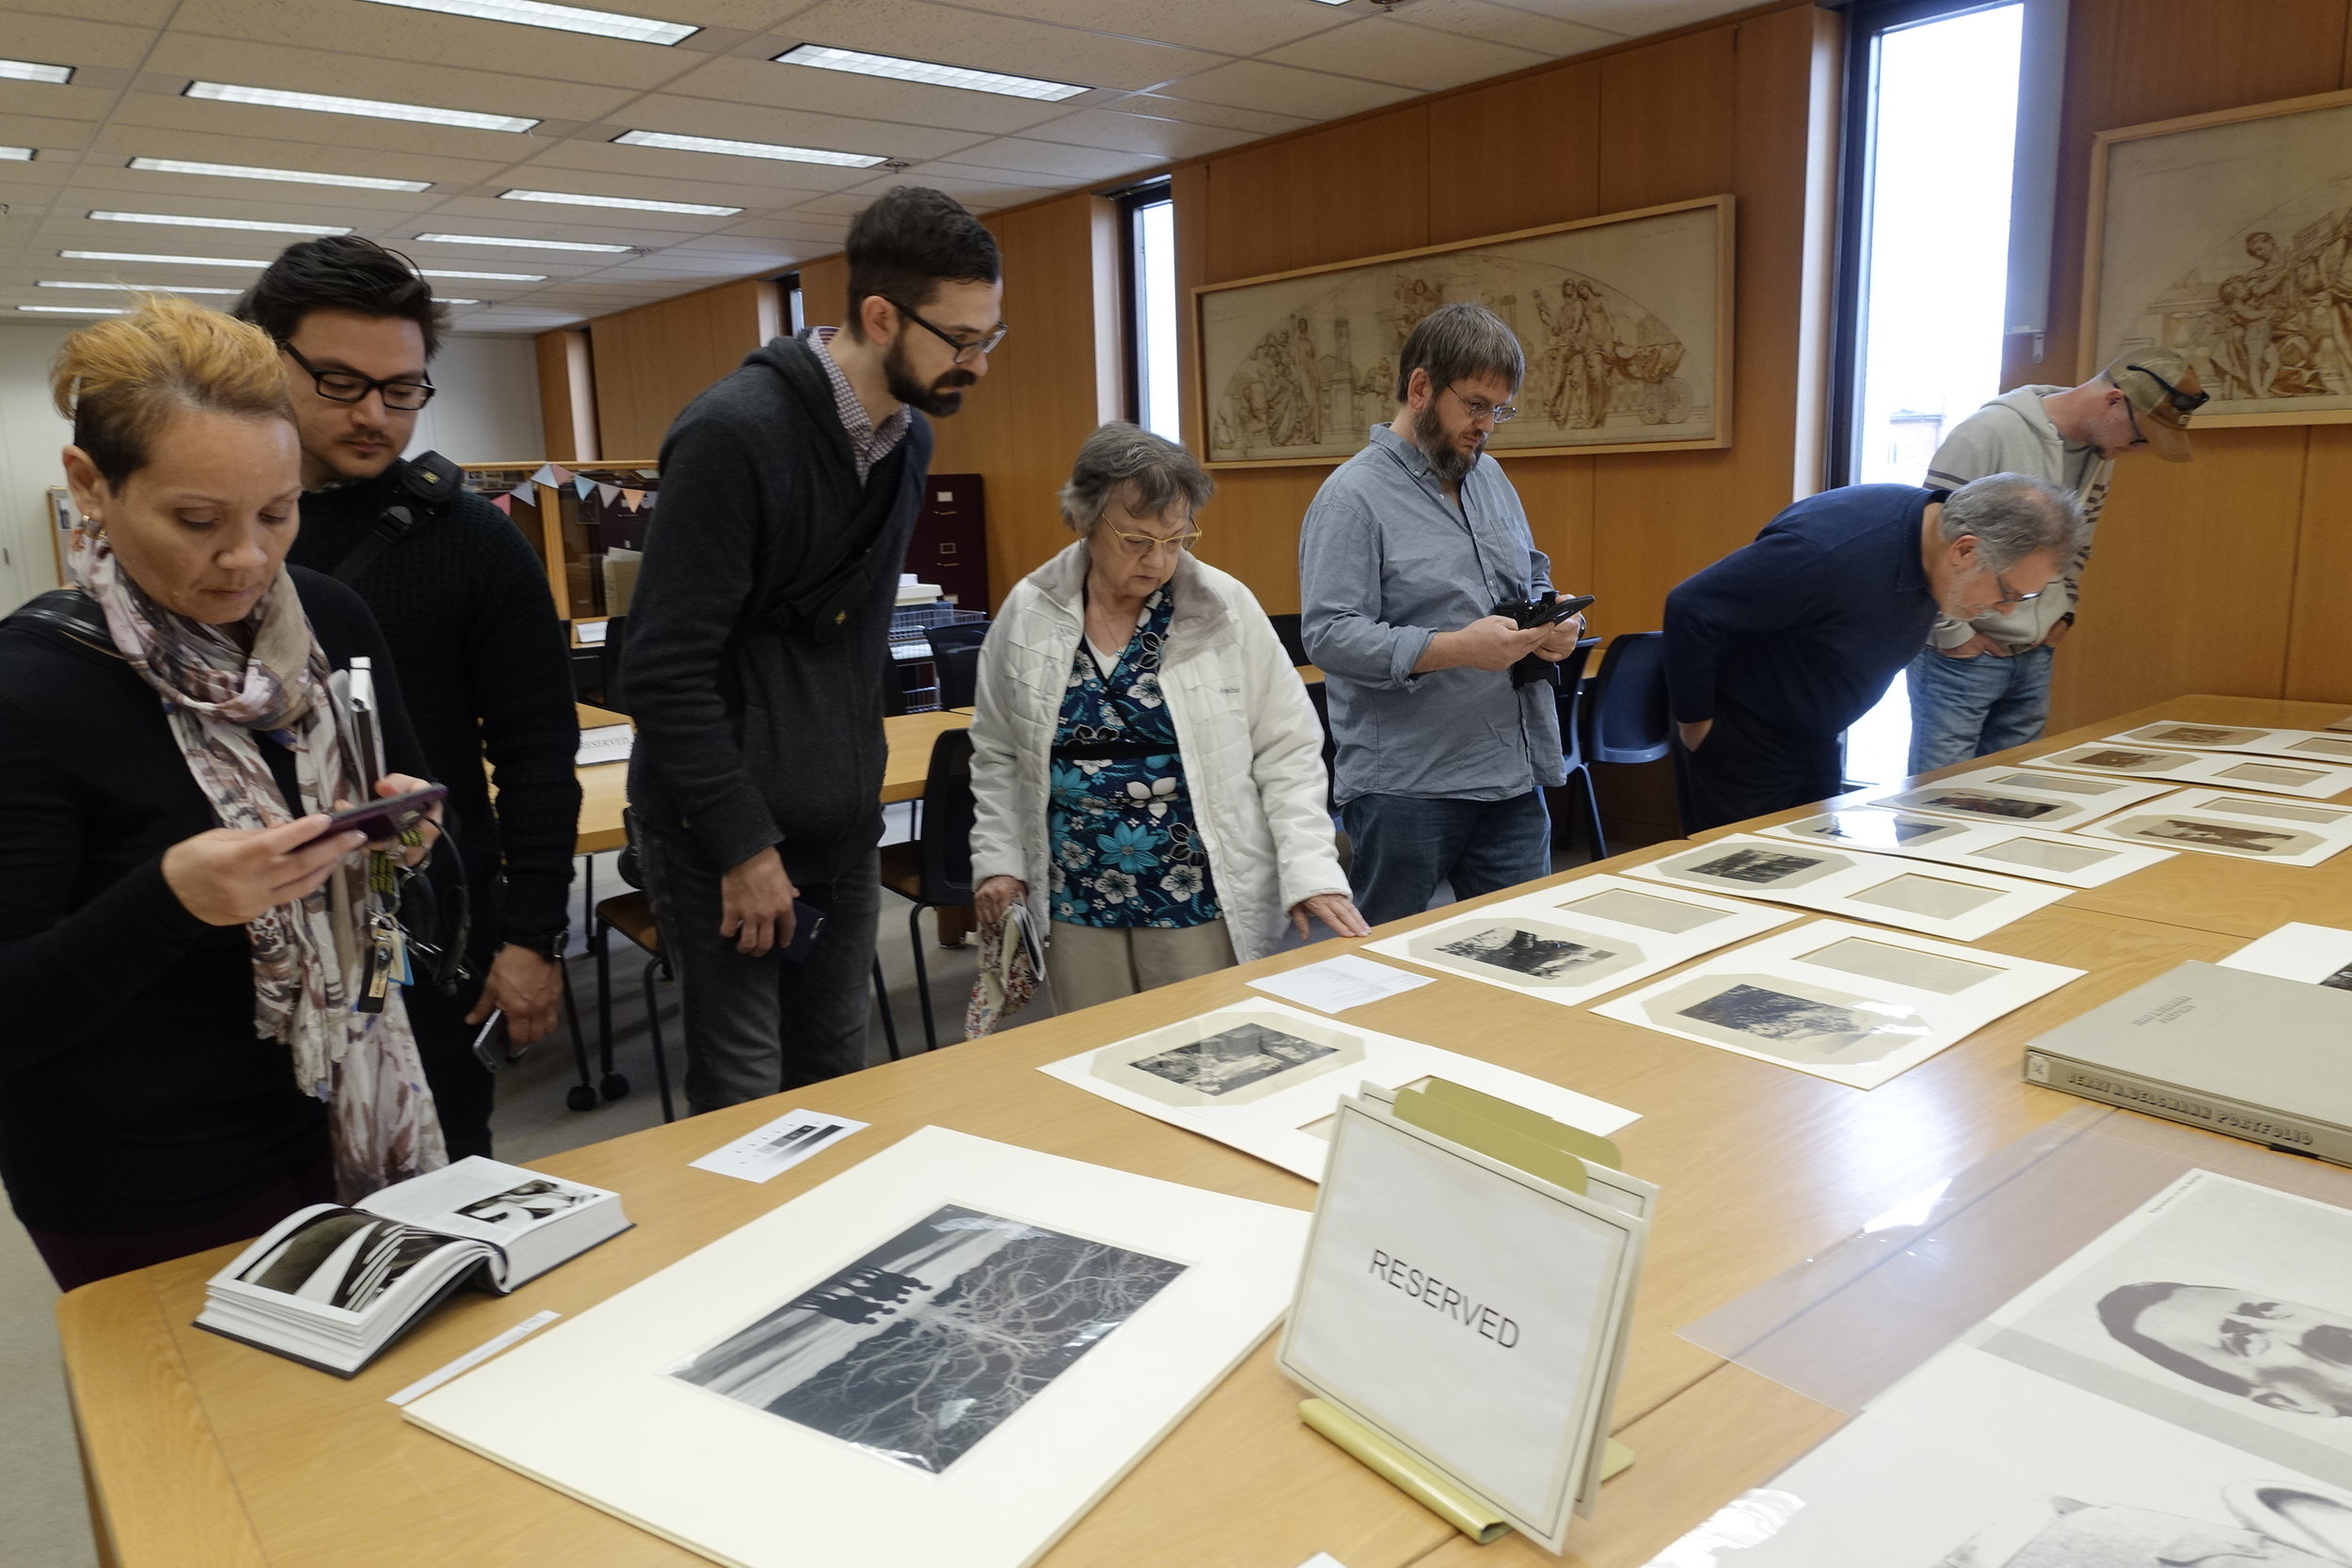  Members of the American Society of Media Photographers (ASMP), Washington DC Chapter visit the photographic reading room of the Library of Congress, Madison Building on April 7, 2017. Photos by John St Hilaire | Lightenough.com 